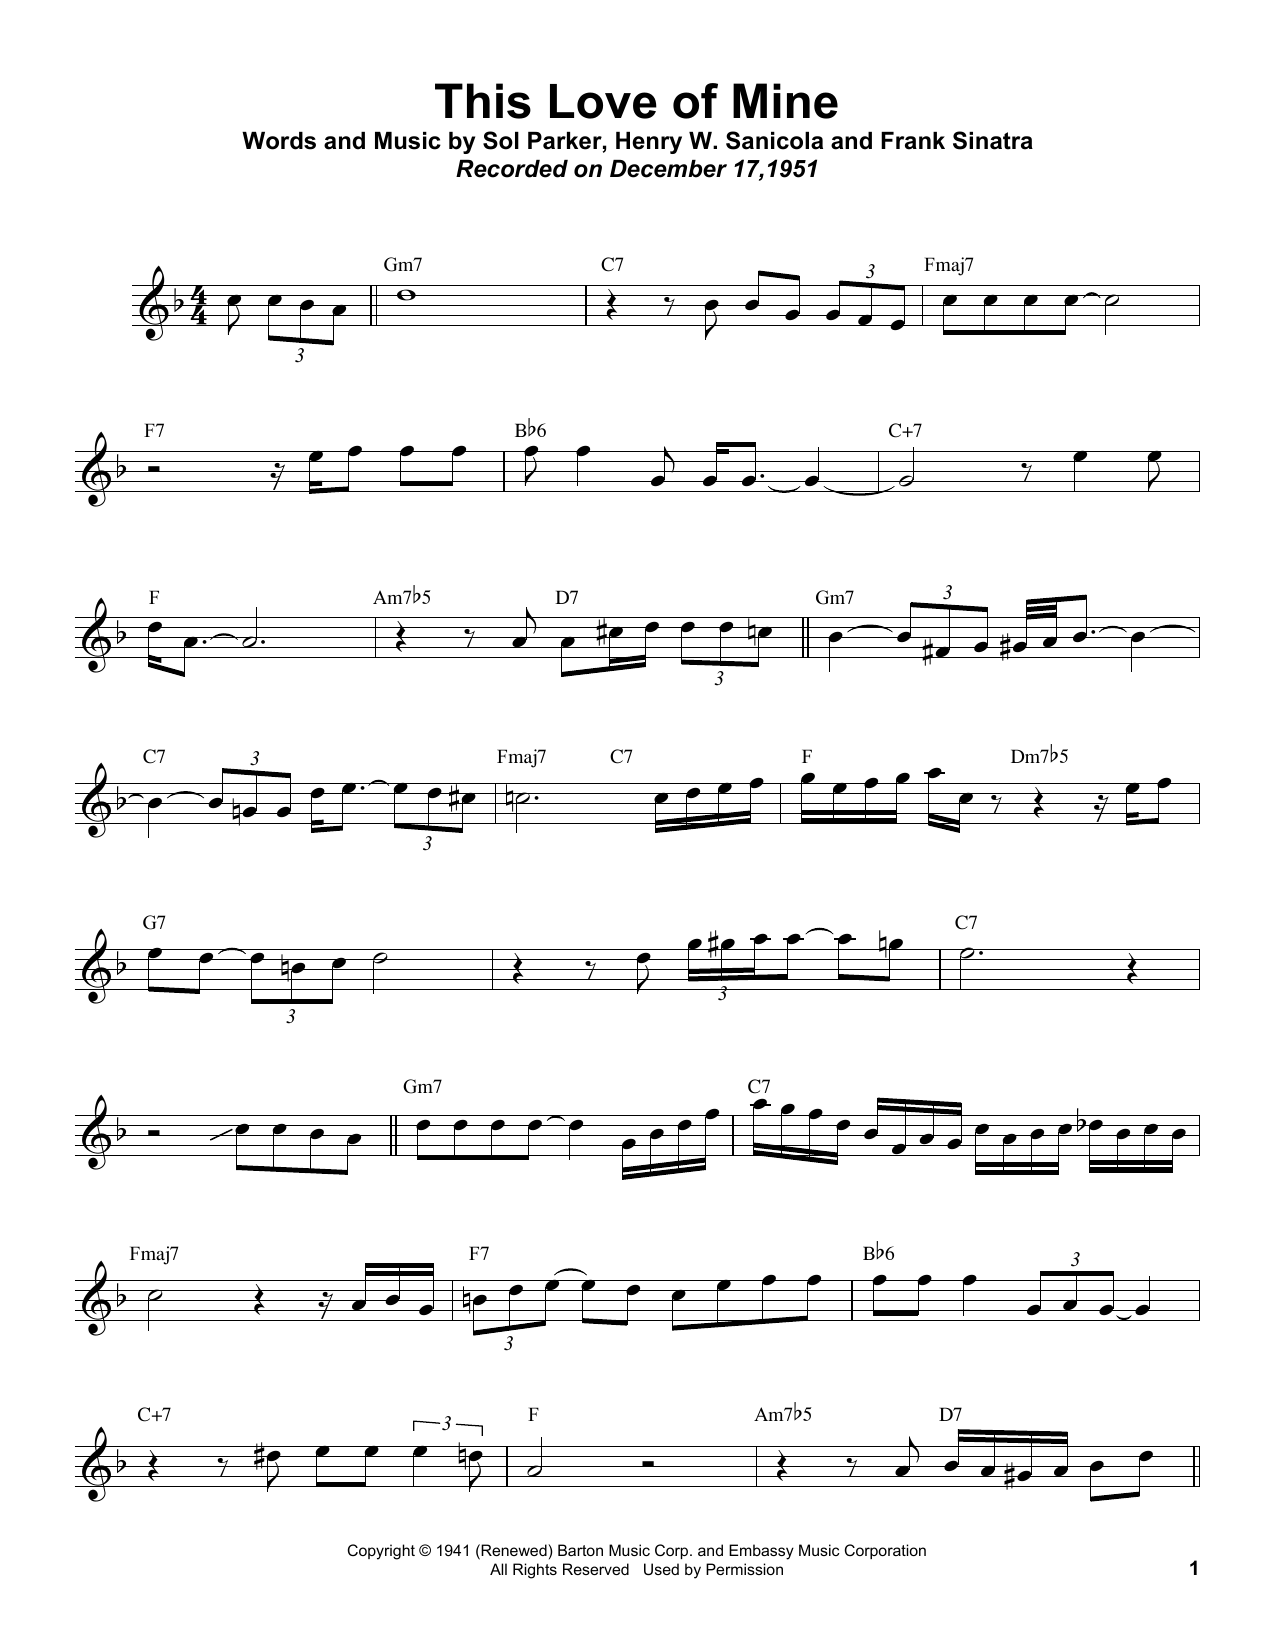 Download Sonny Rollins This Love Of Mine Sheet Music